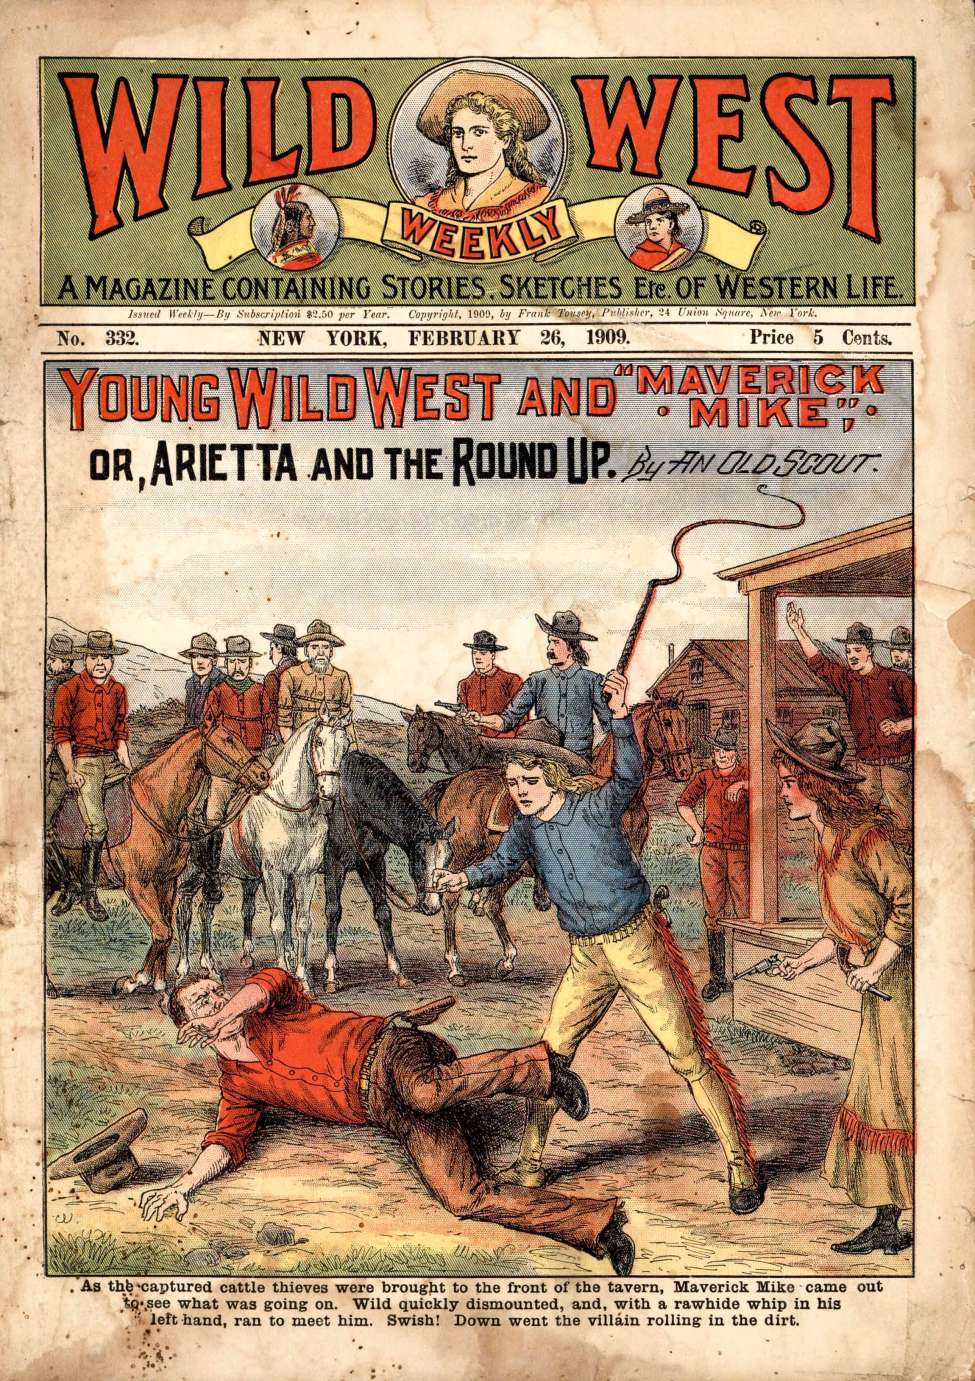 Book Cover For Wild West Weekly 332 - Young Wild West and "Maverick Mike"